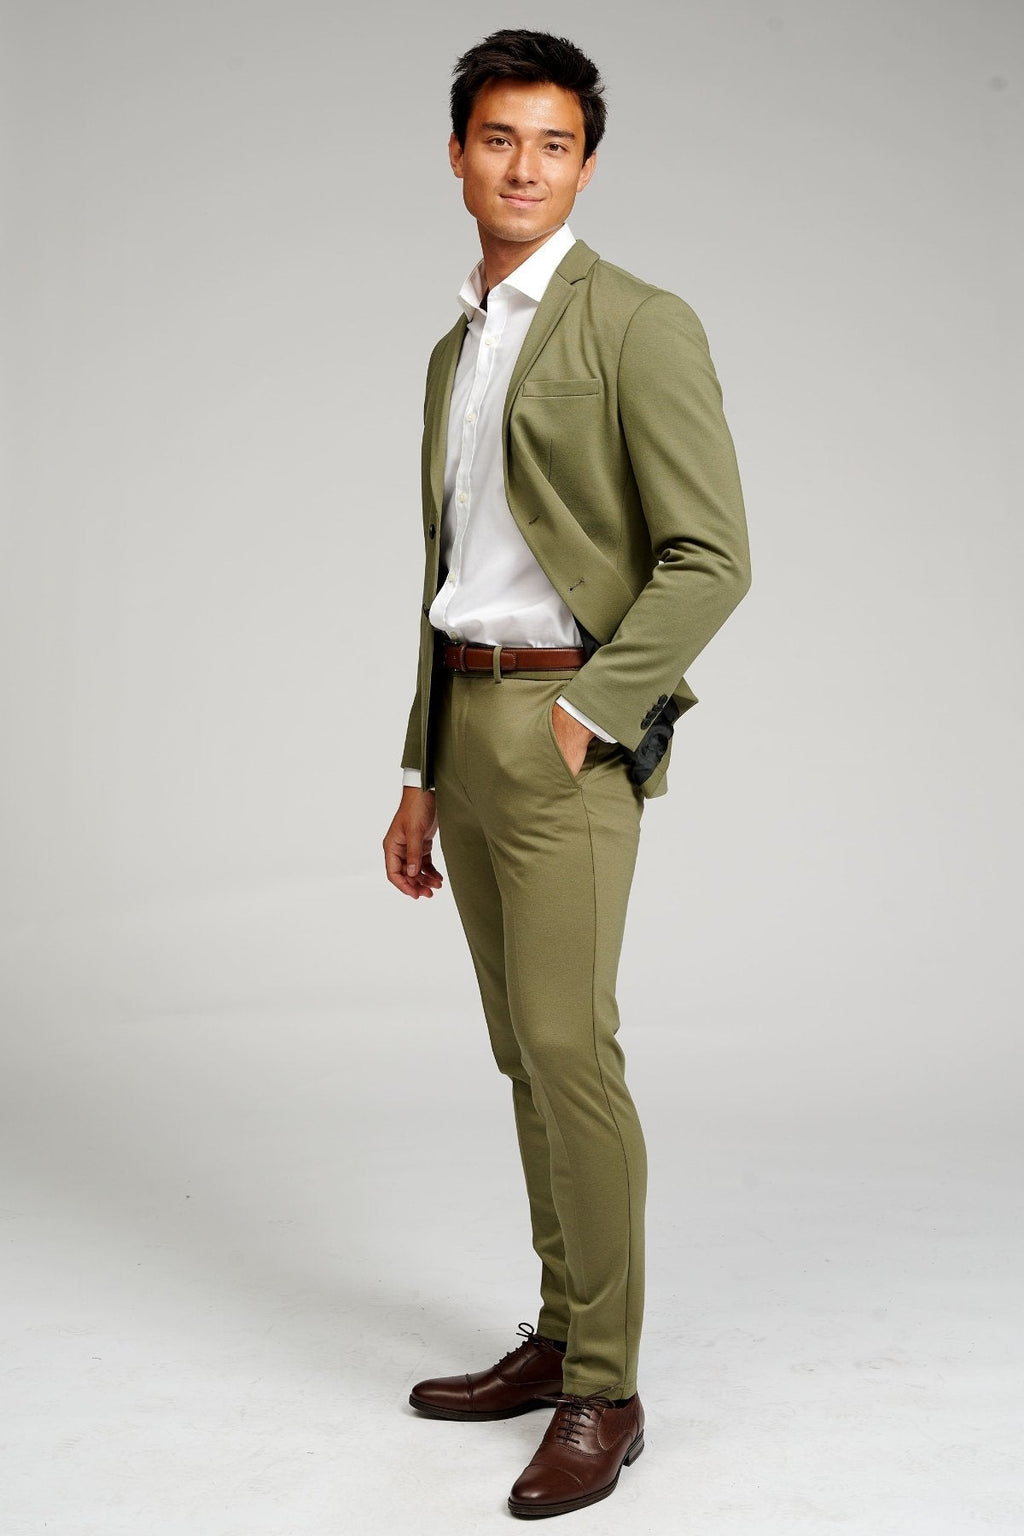 The Original Performance Suit™️ (Olive) + Shirt & Tie - Package Deal